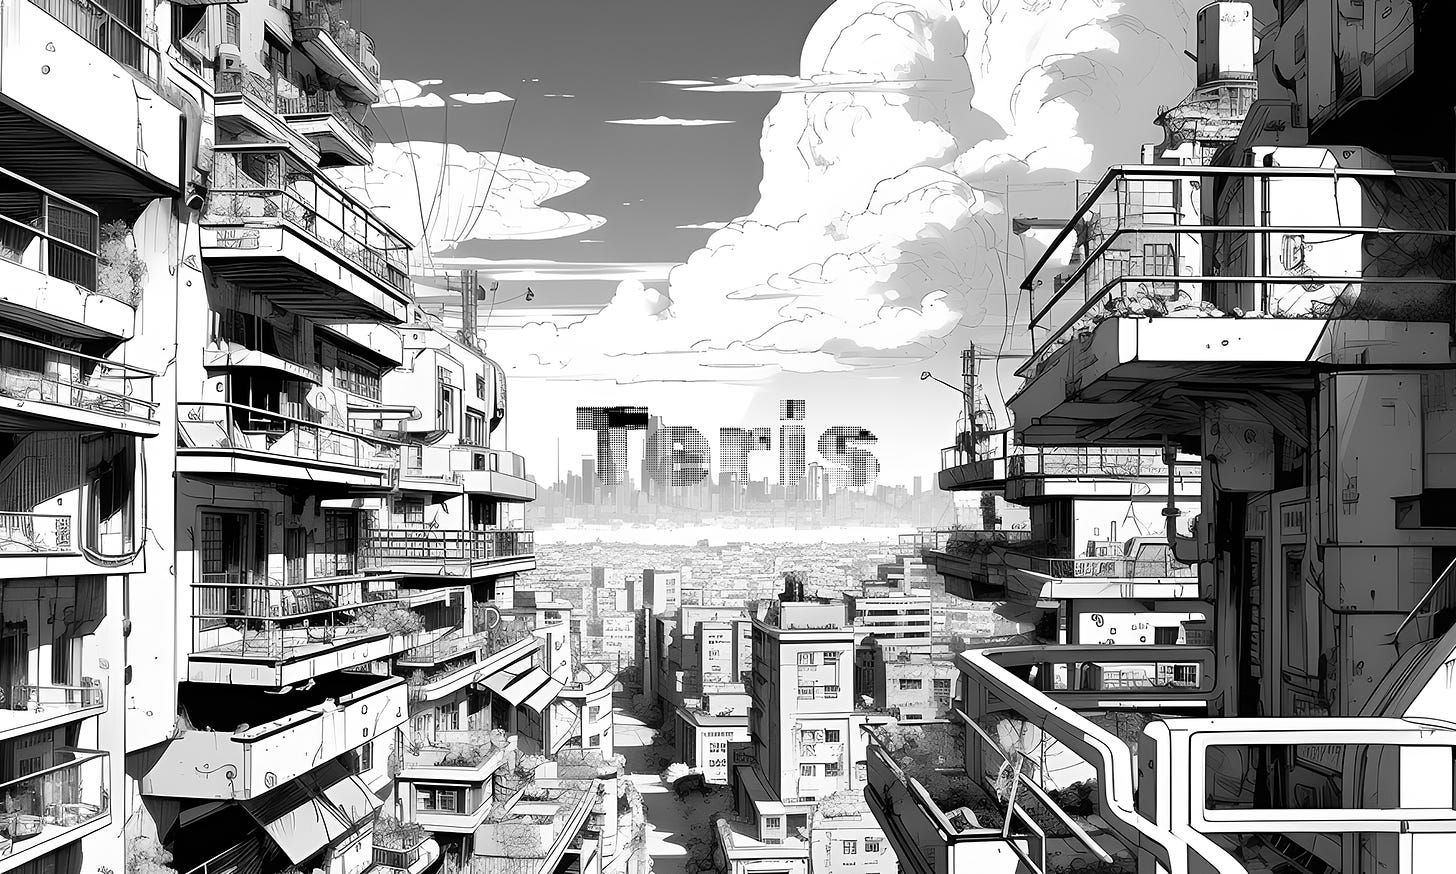 Teris has a population of 10 billion people and it's all too familiar to our own world. Concept art for AI Genesis